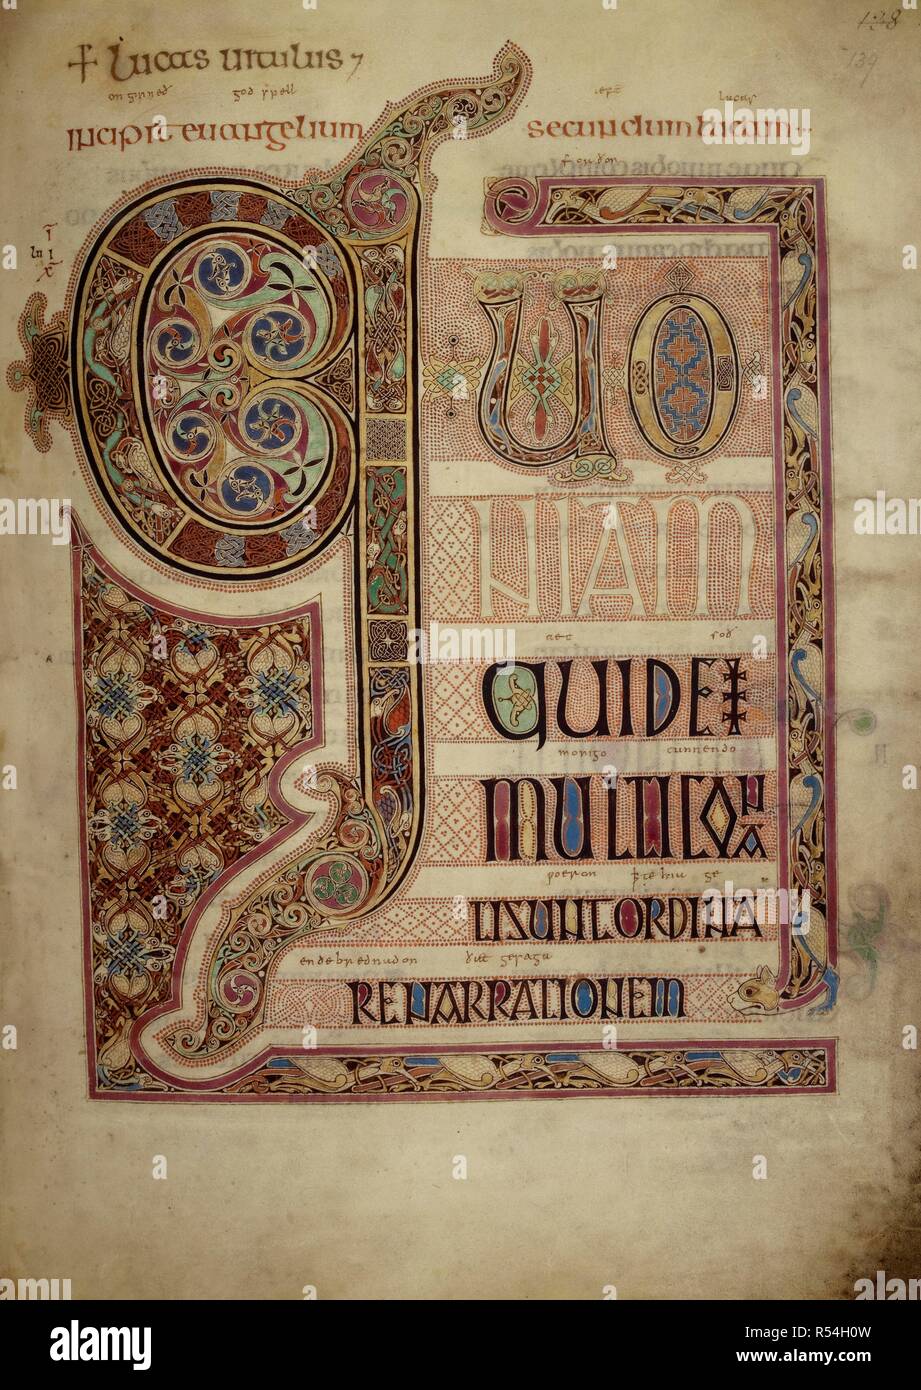 St. Luke's Gospel; Incipit page. Lindisfarne Gospels. N.E. England [Lindisfarne]; 710-721. [Whole folio] Incipit page to St. Luke's Gospel. Text, with decorated initial 'Q'. Decorated borders.  Image taken from Lindisfarne Gospels.  Originally published/produced in N.E. England [Lindisfarne]; 710-721. . Source: Cotton Nero D. IV, f.139. Language: Latin, with Anglo-Saxon glosses. Stock Photo